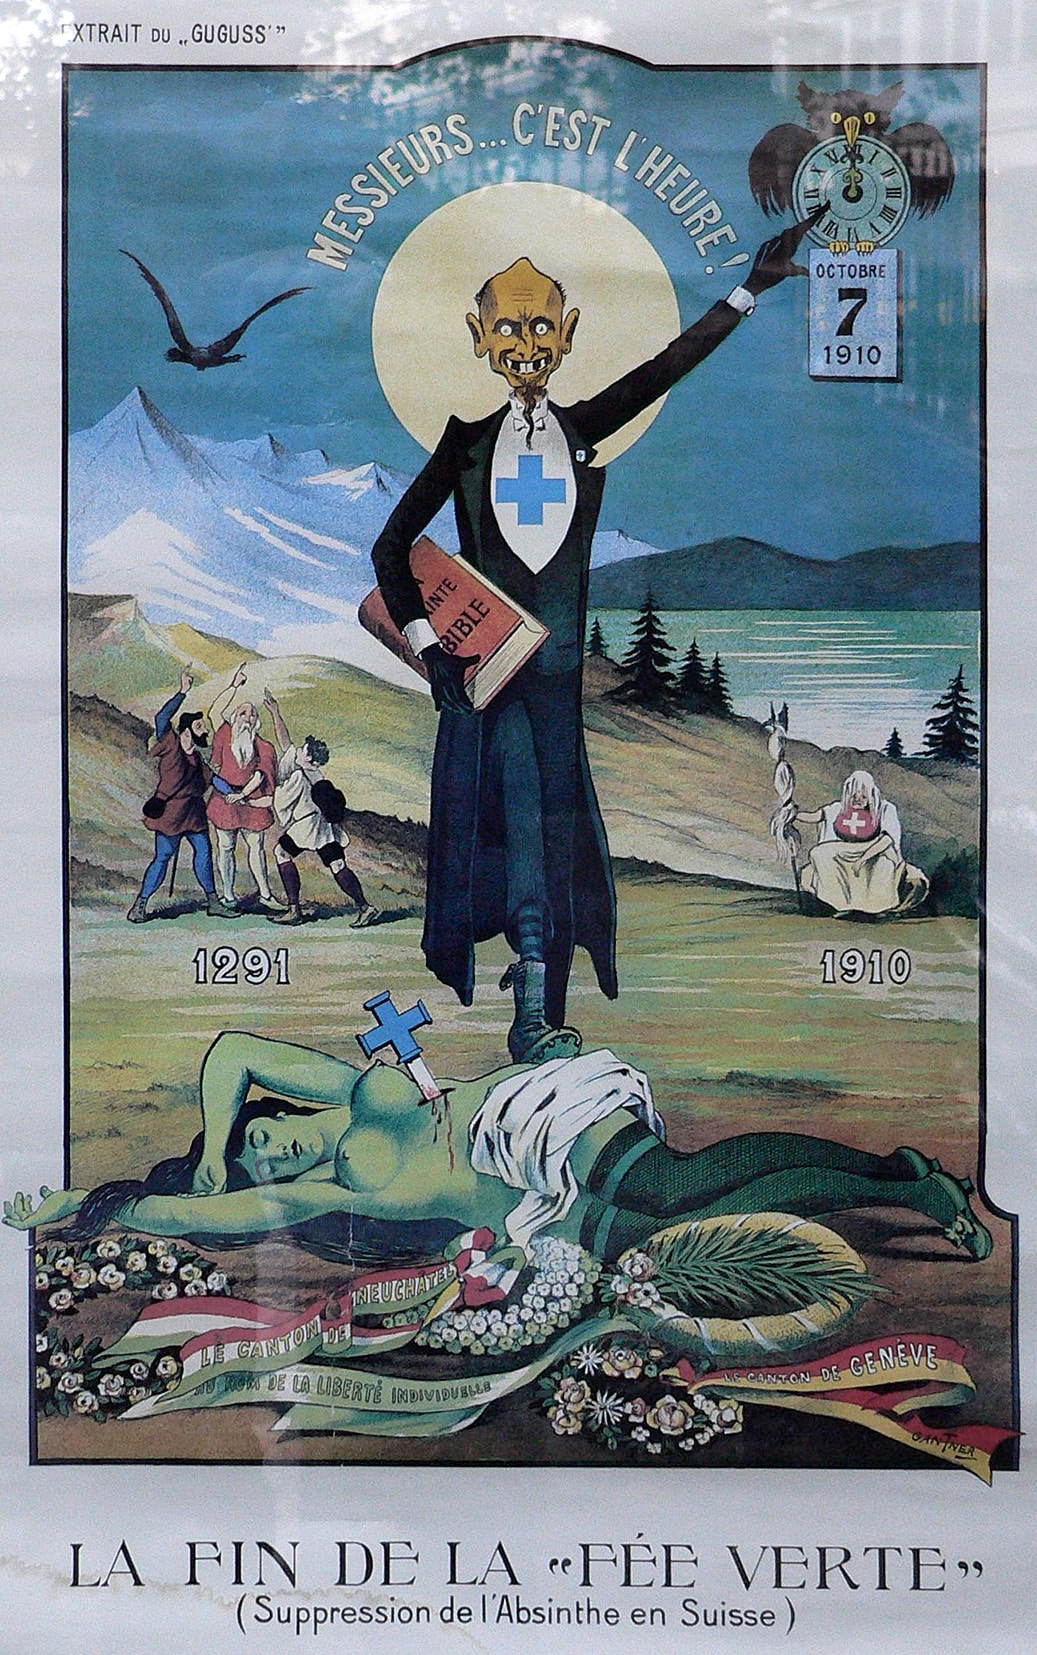 La fin de la fée verte ("The End of the Green Fairy"): Swiss poster criticizing the country's prohibition of absinthe in 1910